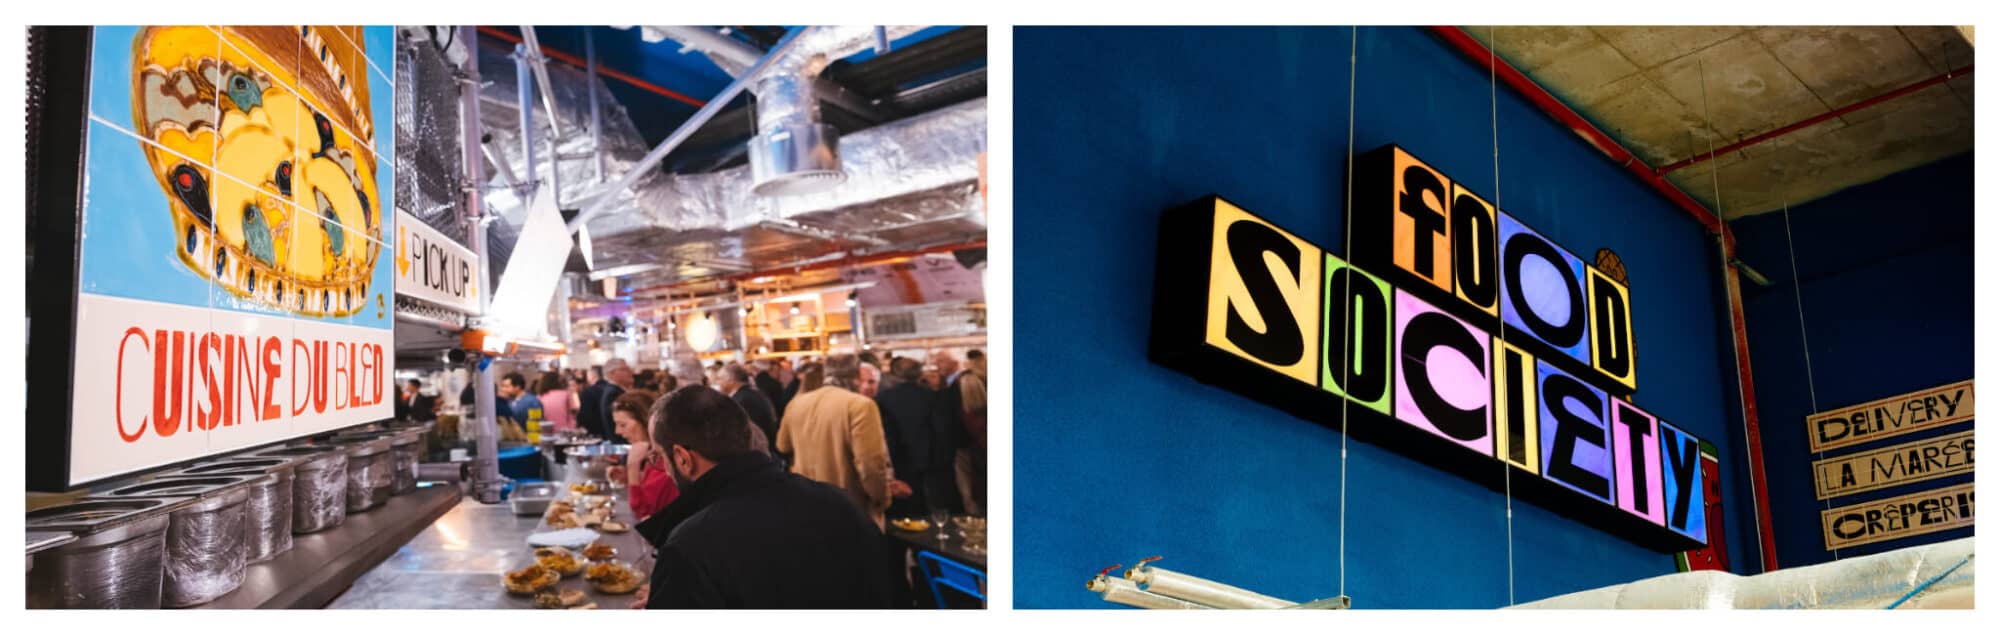 Left: The interior of Food Society Paris, with different stalls and silver ceiling pipes. Right: the logo of Food Society in purple, pink, and yellow.